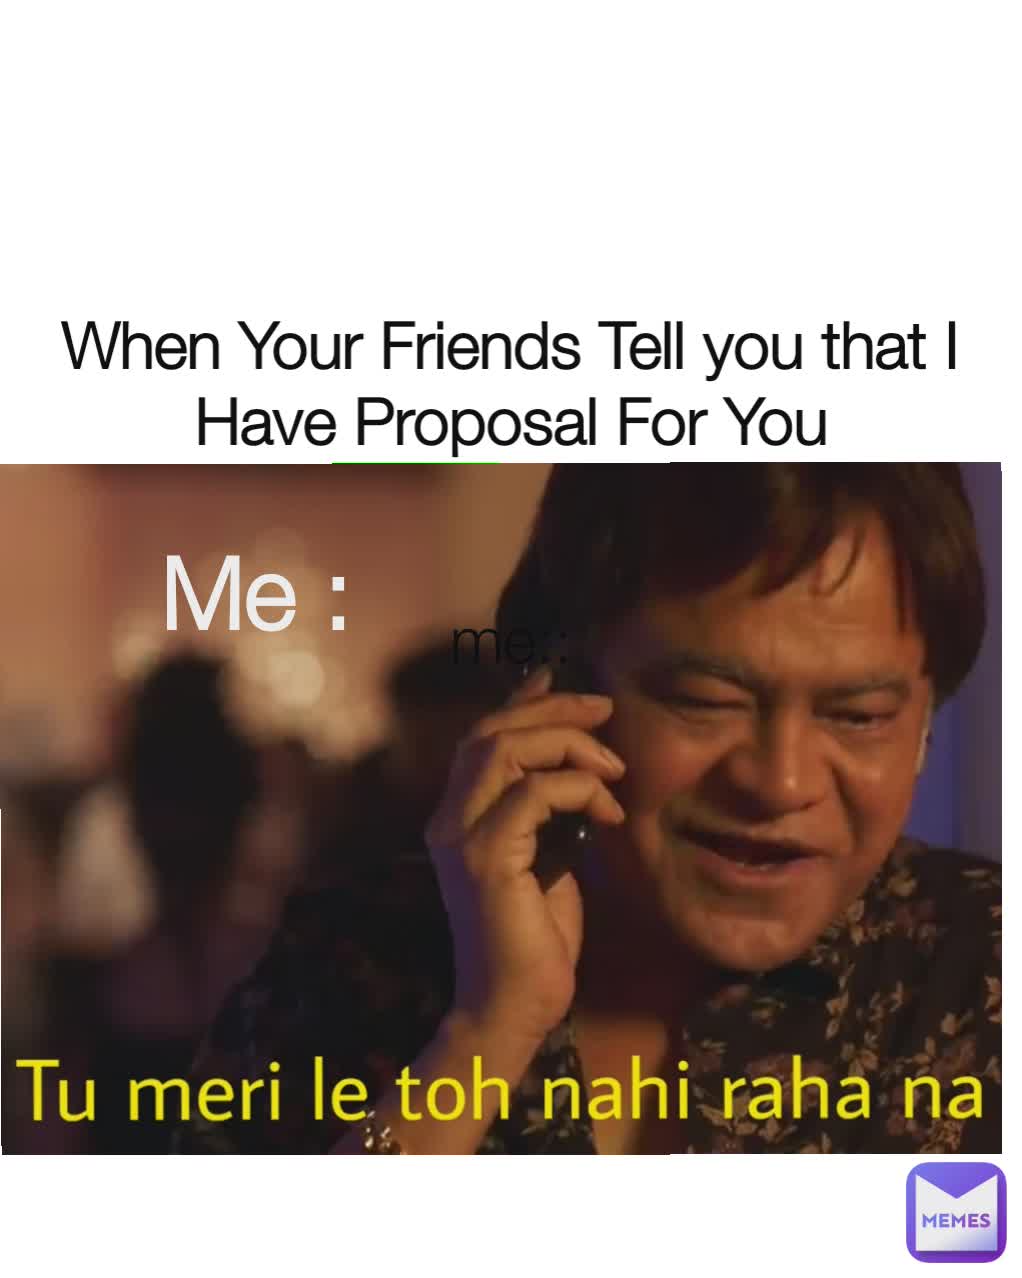 me : me:  Me : When Your Friends Tell you that I Have Proposal For You